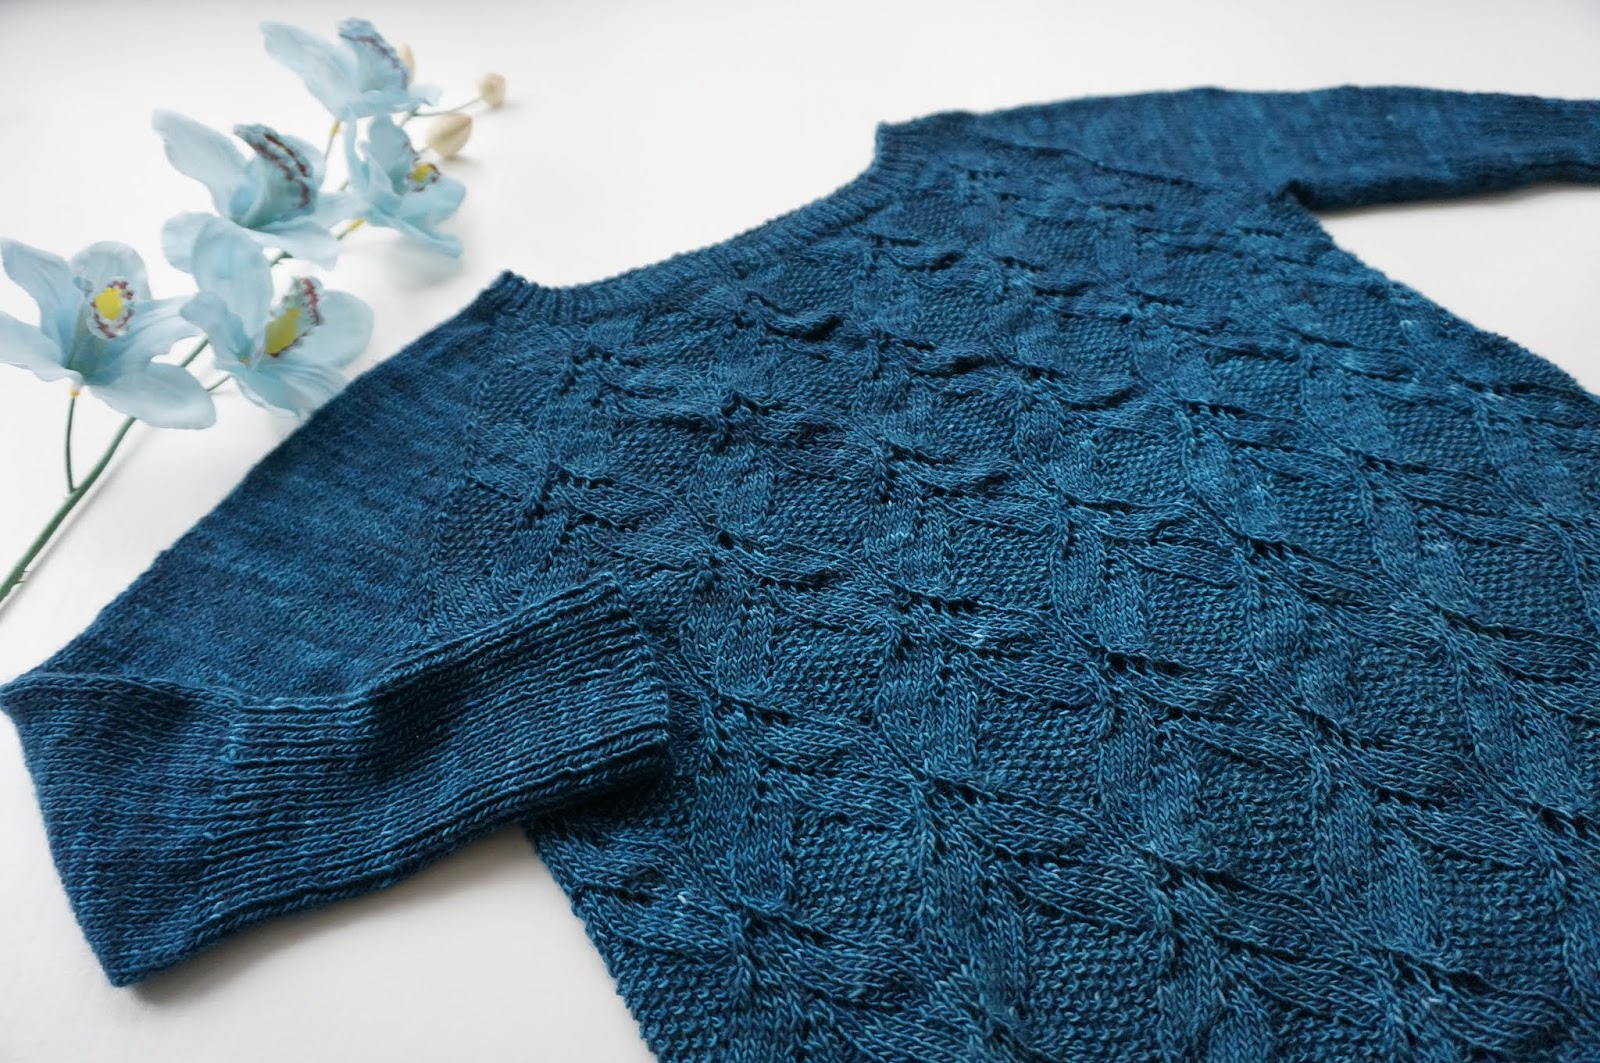 Poet sweater knitting pattern review